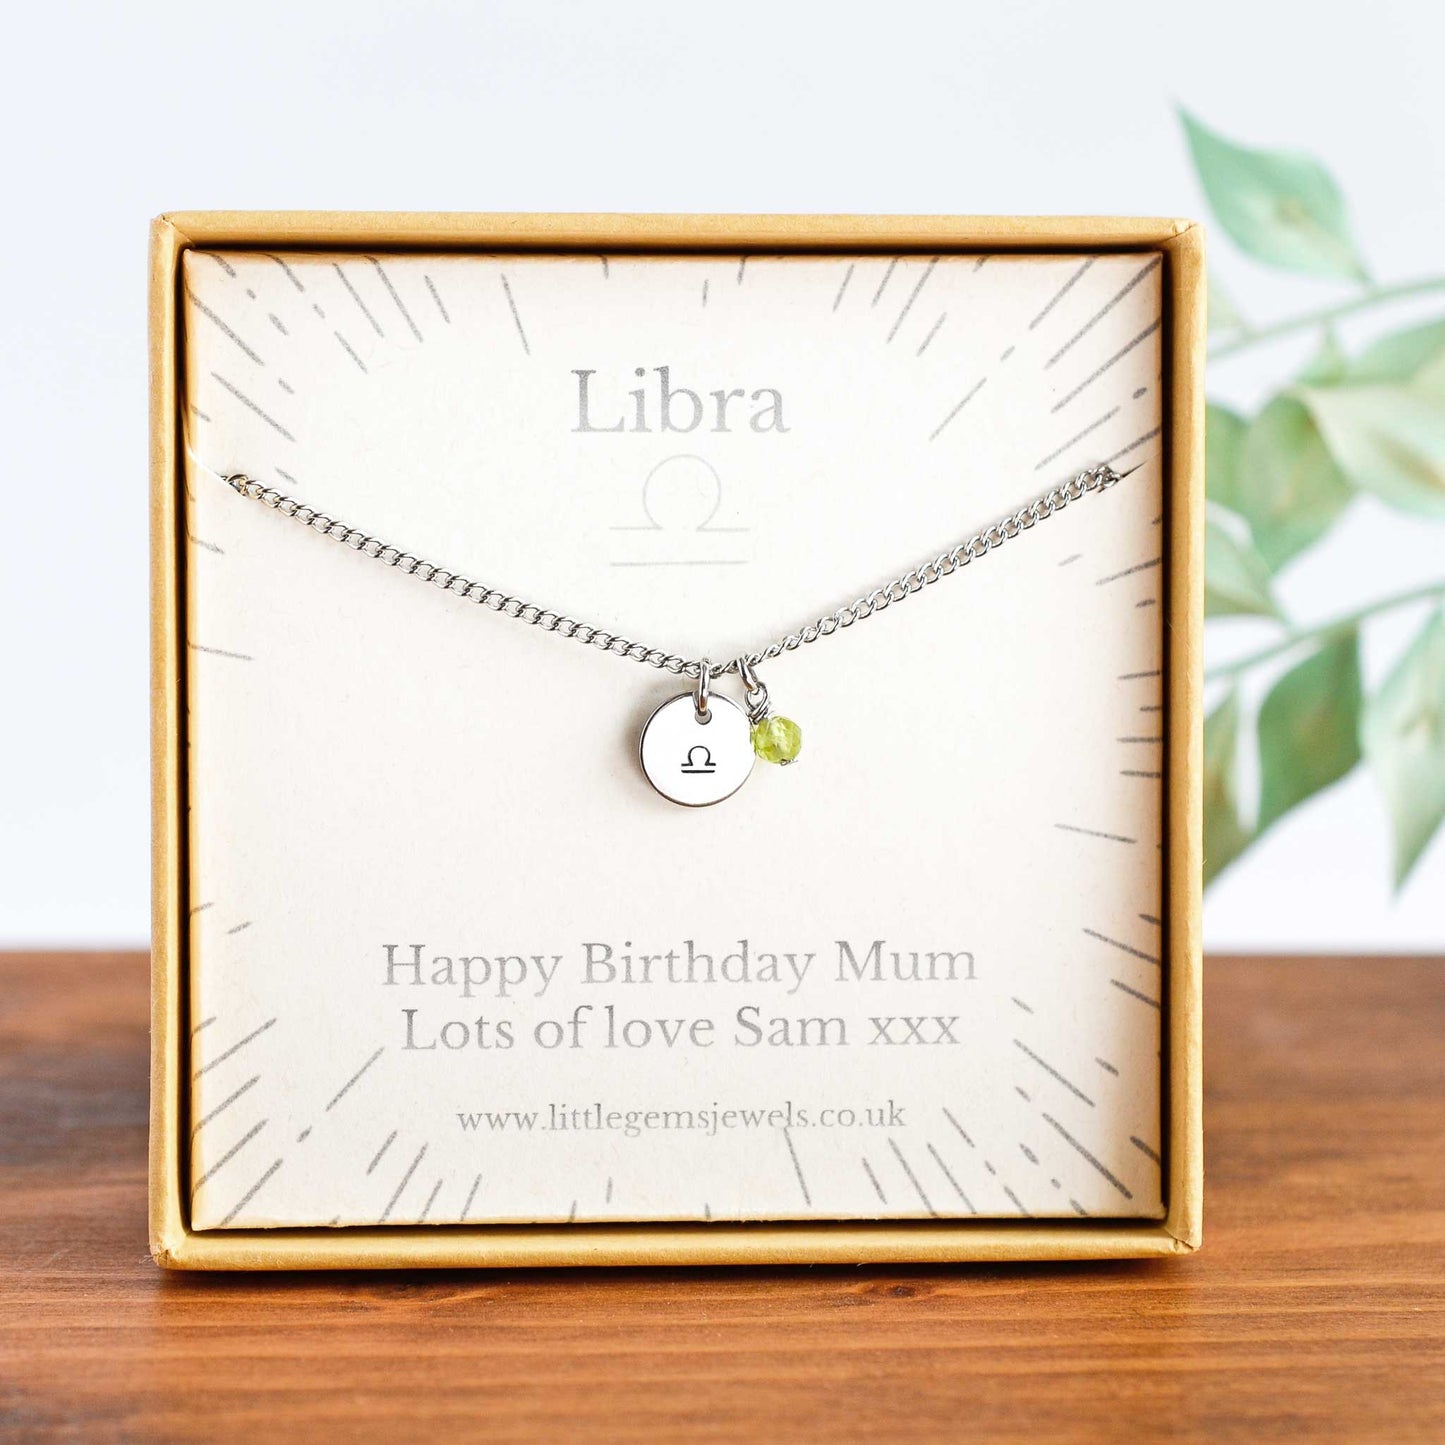 Libra Zodiac necklace with personalised gift message in eco friendly gift box